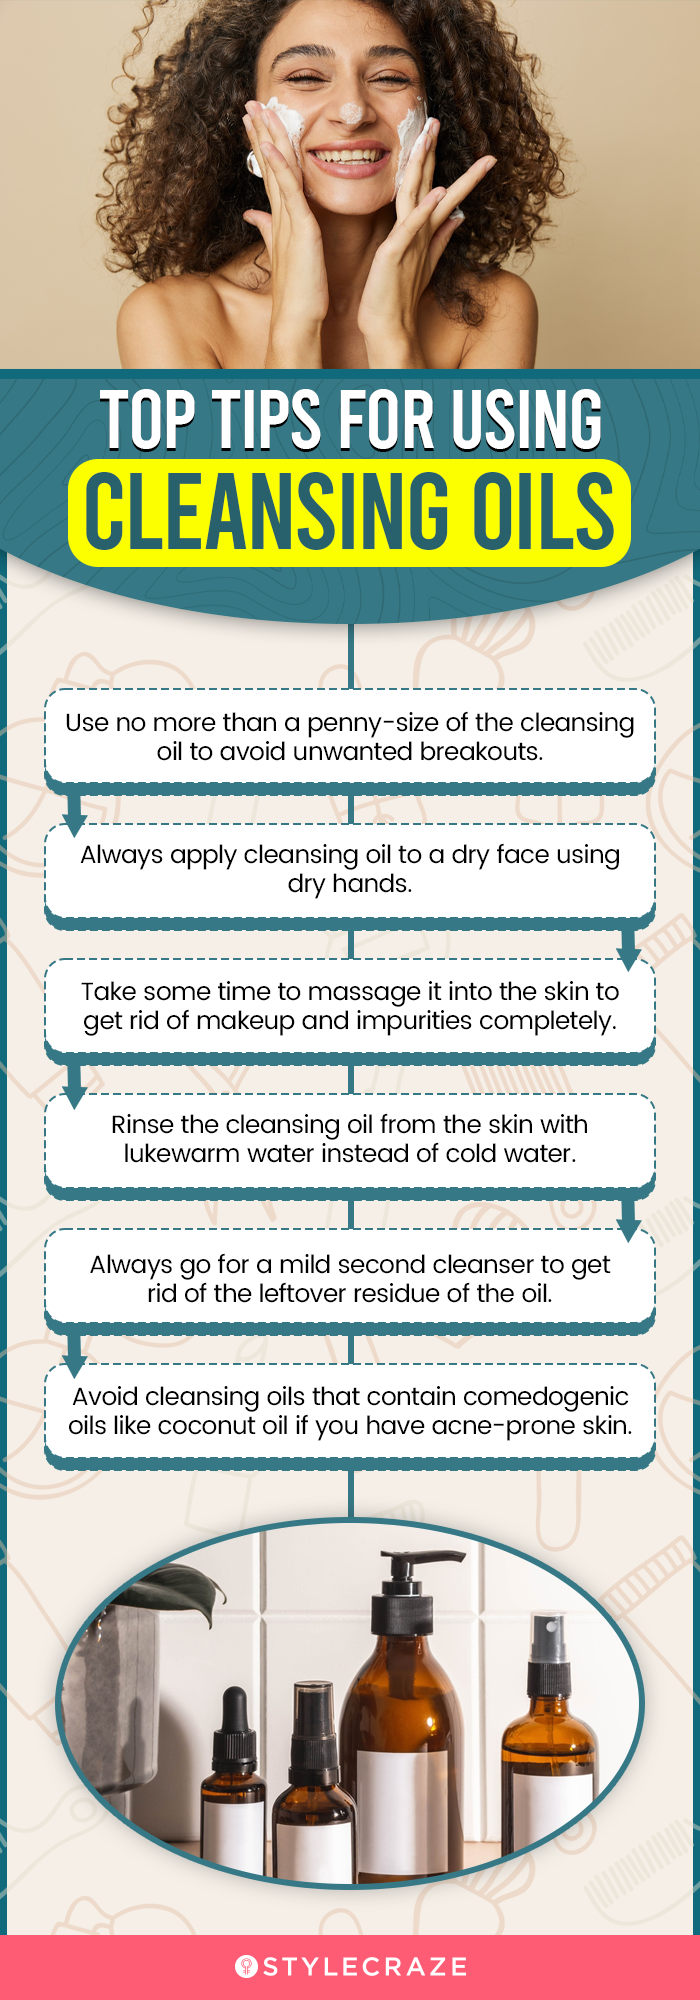 Top Tips For Using Cleansing Oils(infographic)